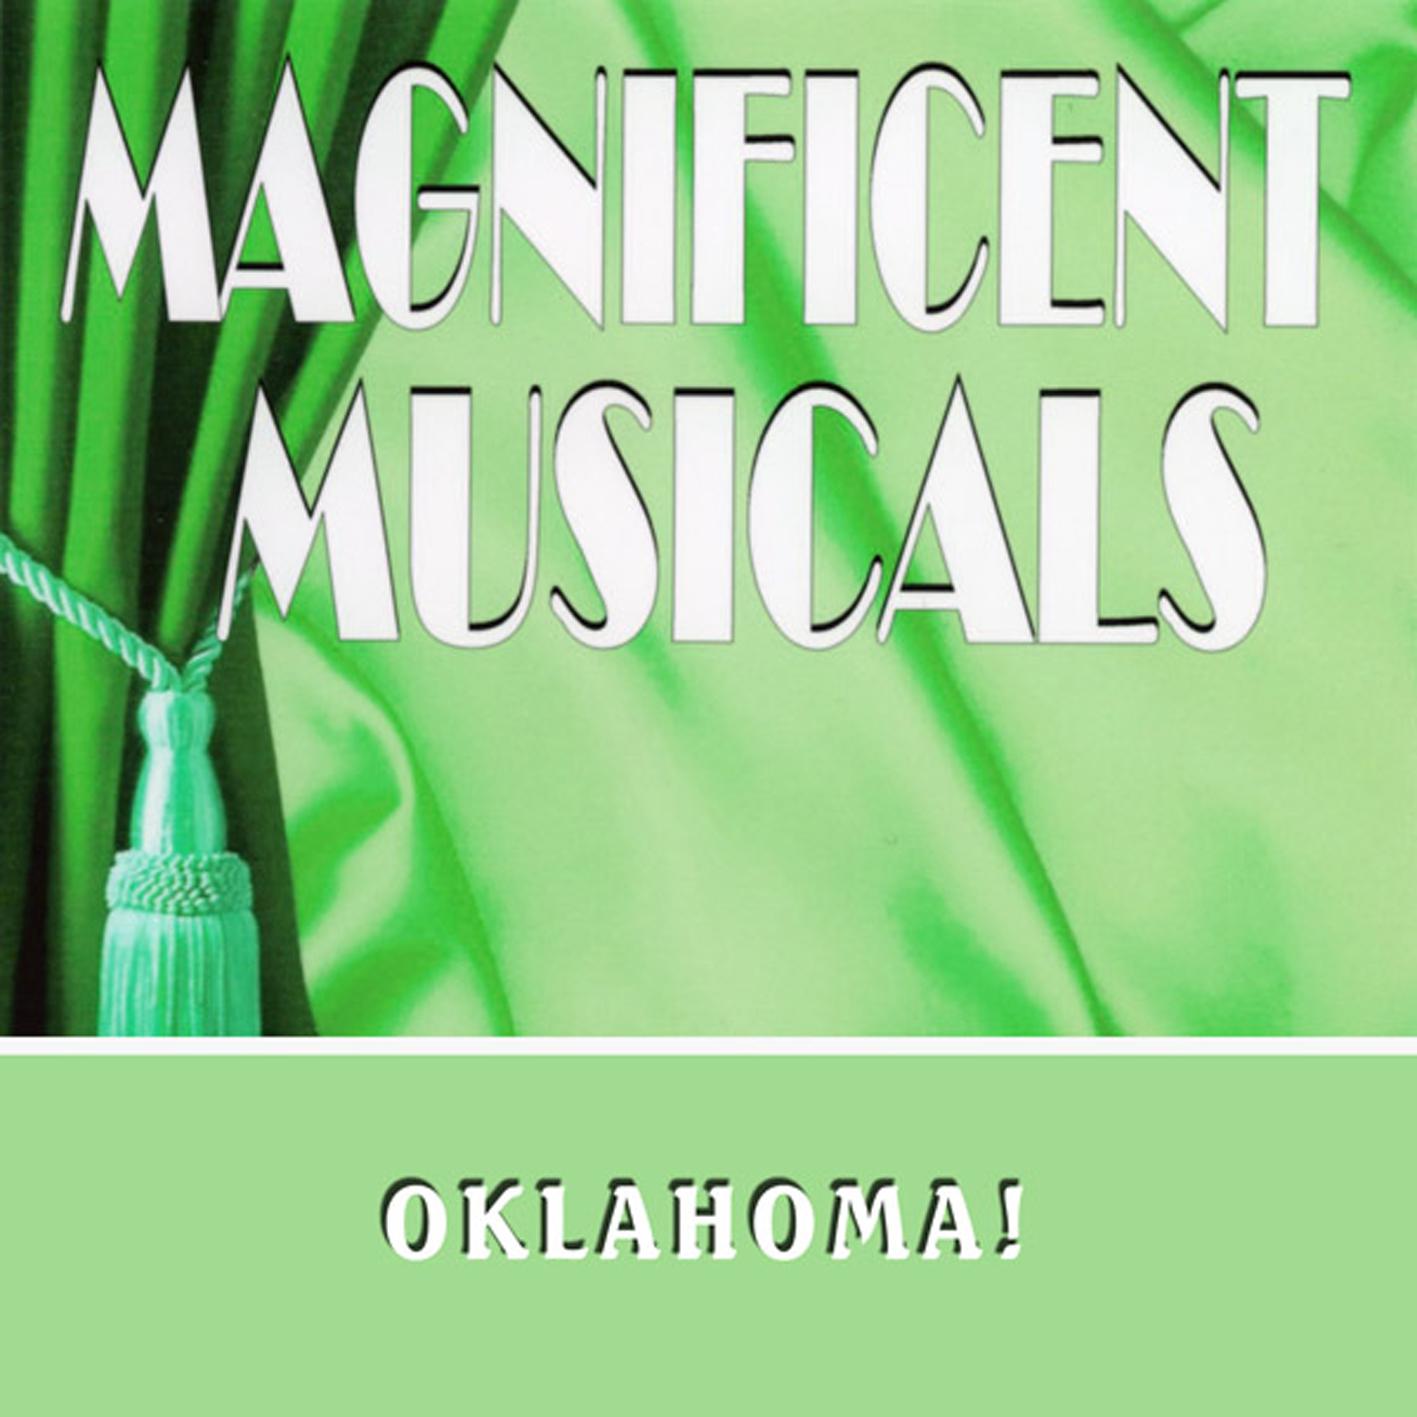 The Magnificent Musicals Oklahoma!